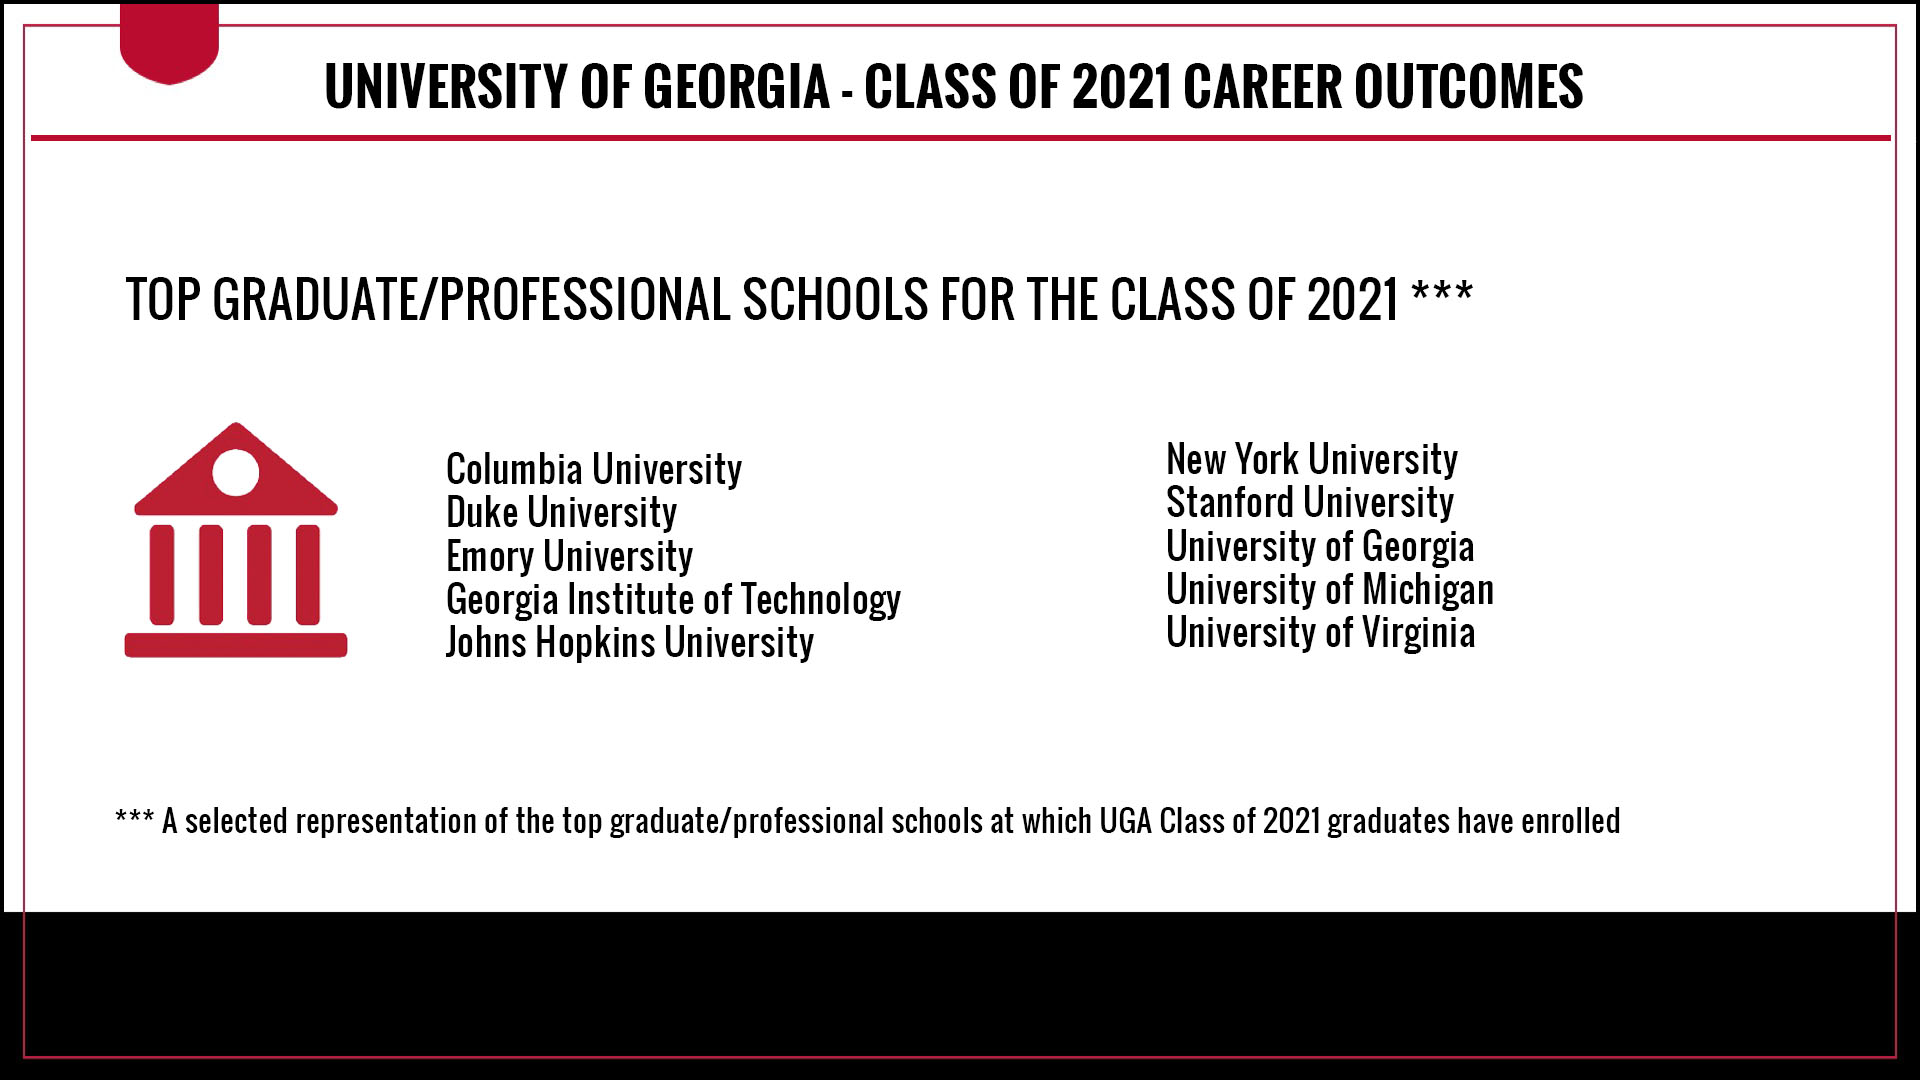 Top graduate and professional schools at which UGA Class of 2021 graduates have enrolled include Columbia University, Duke University, Emory University, Georgia Institute of Technology, Johns Hopkins University, New York University, Stanford University, University of Georgia, University of Michigan, and University of Virginia